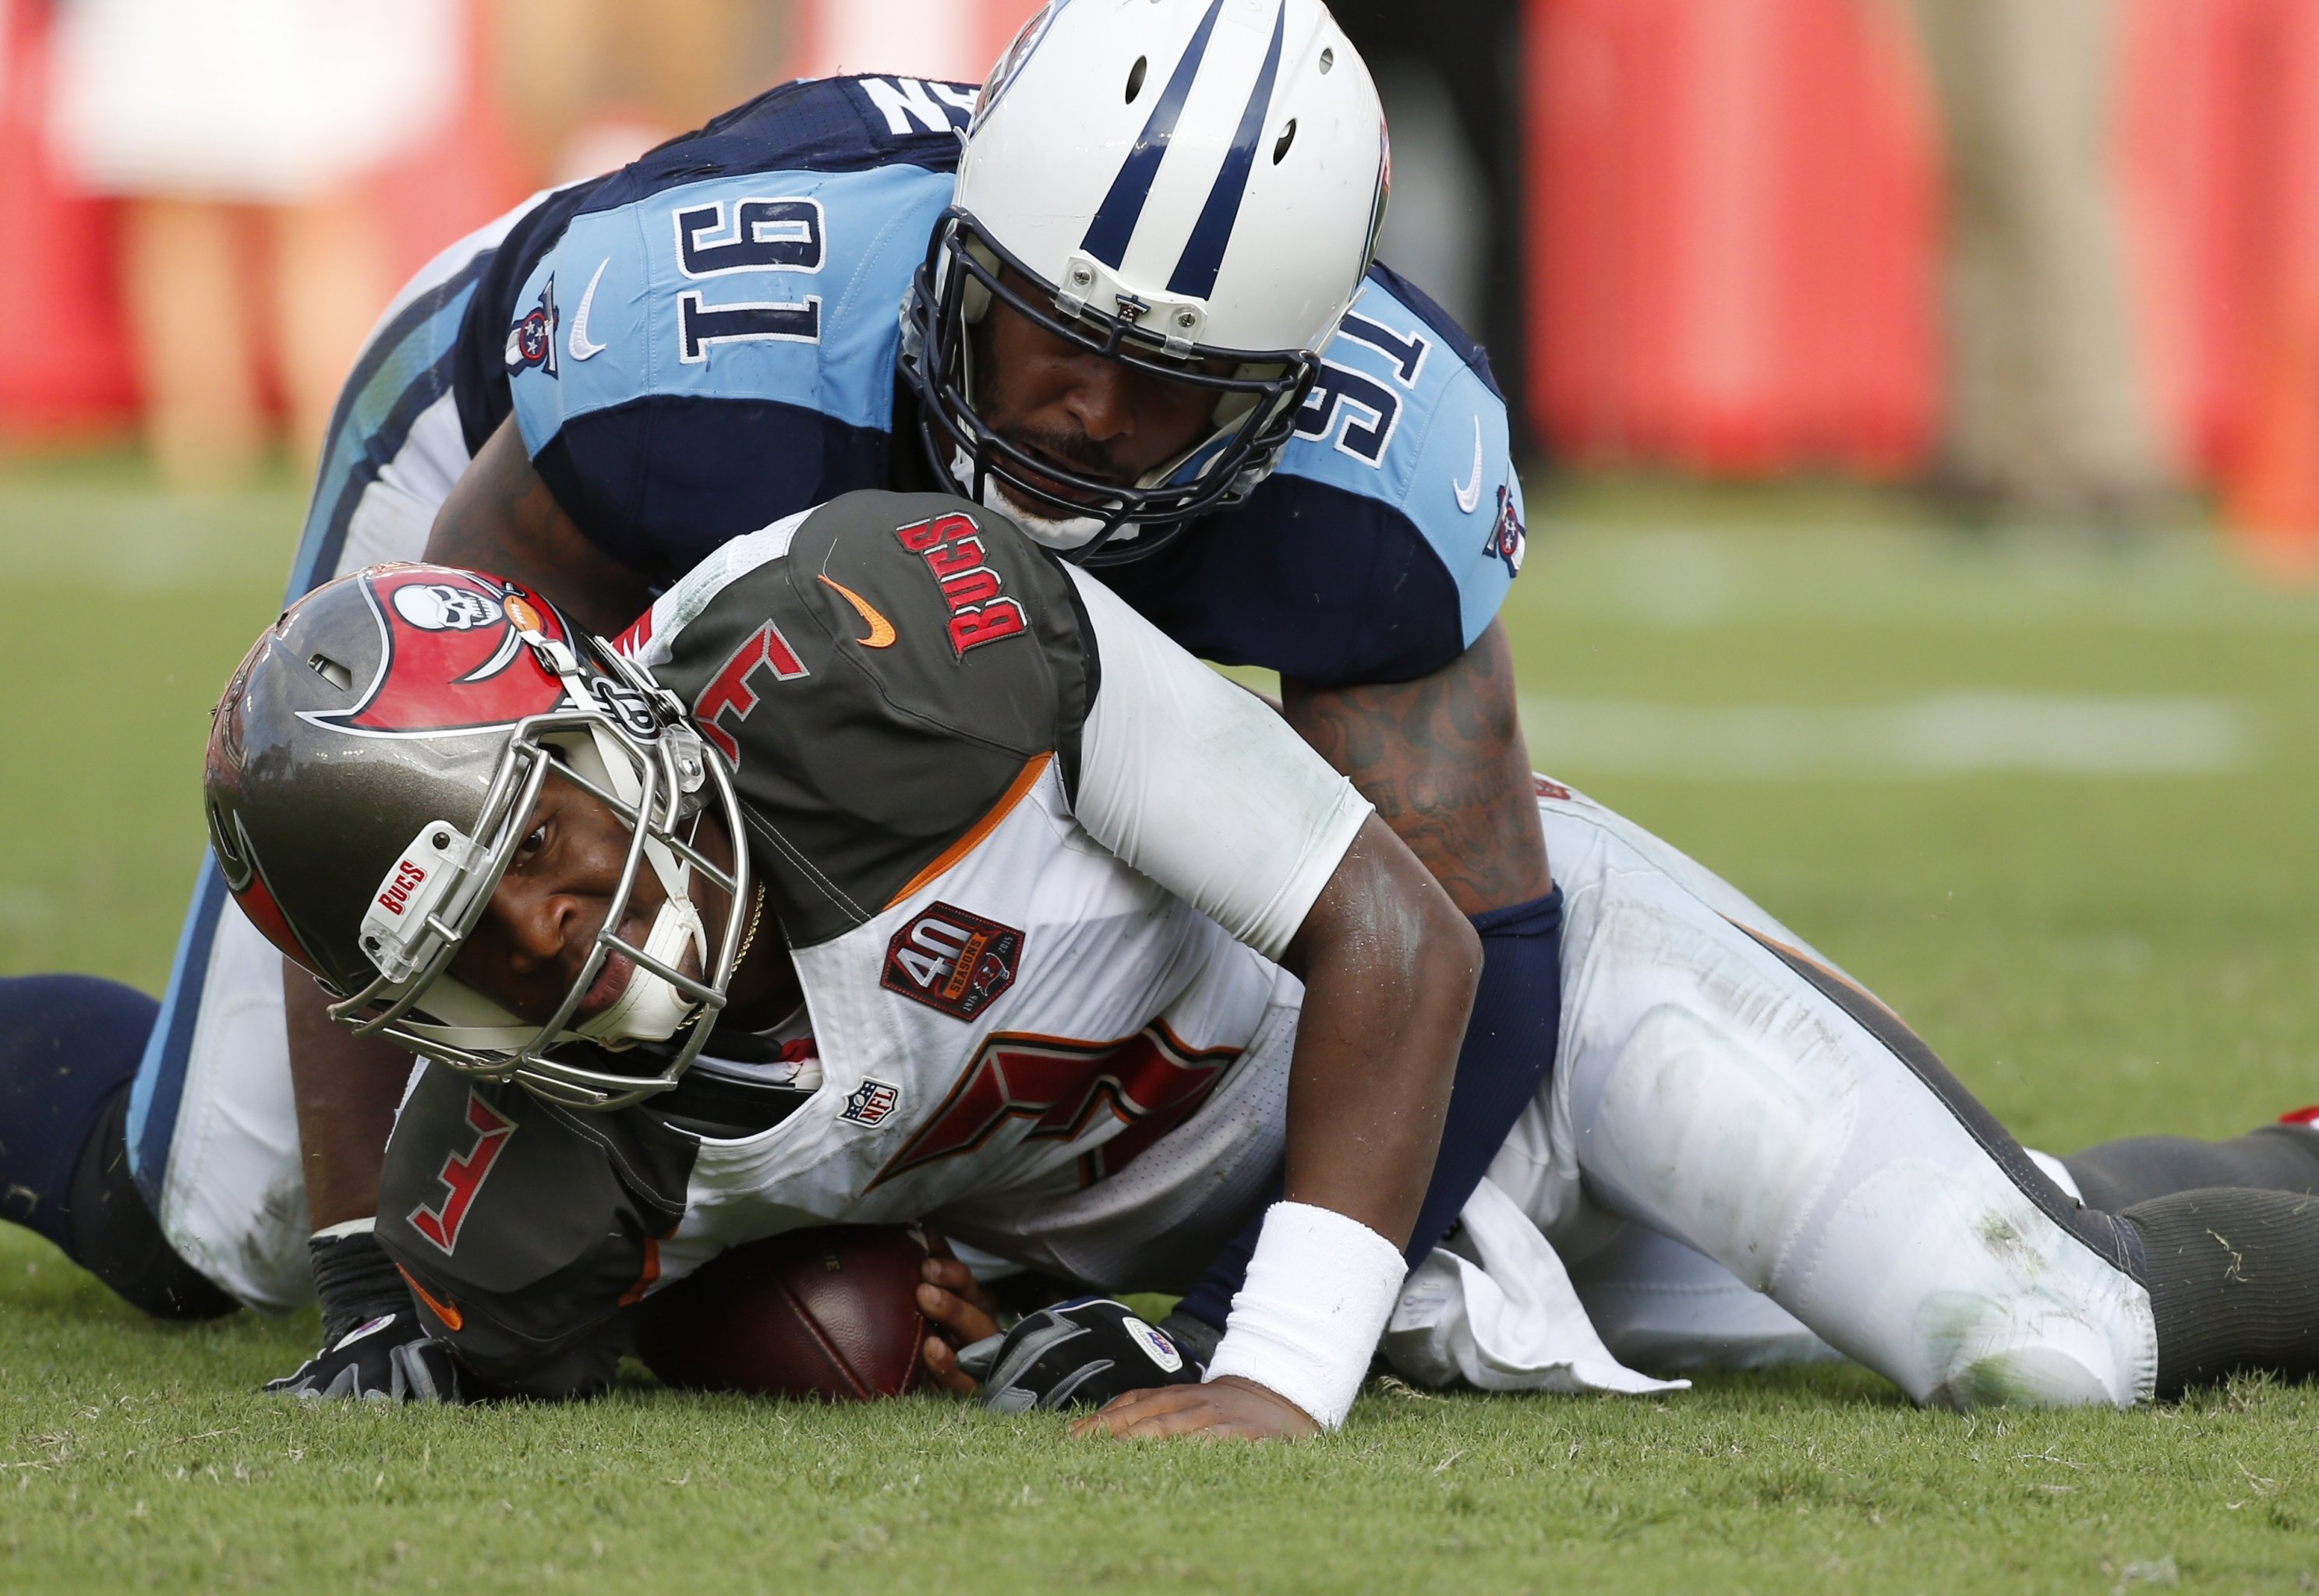 Bucs vs. Titans: 3 players to watch for Tampa Bay